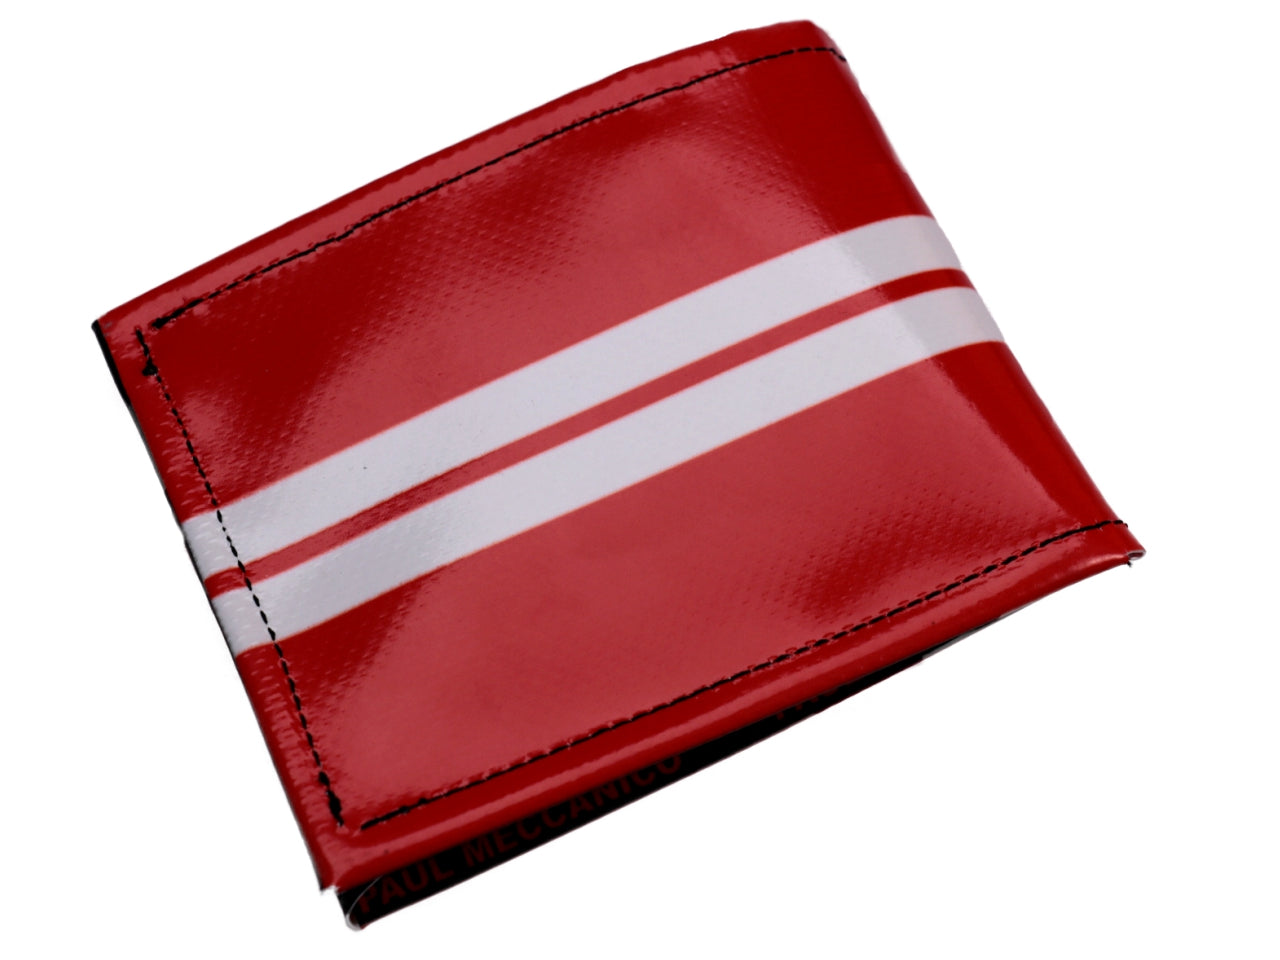 MEN'S WALLET RED AND WHITE. MODEL CRIK MADE OF LORRY TARPAULIN. - Limited Edition Paul Meccanico